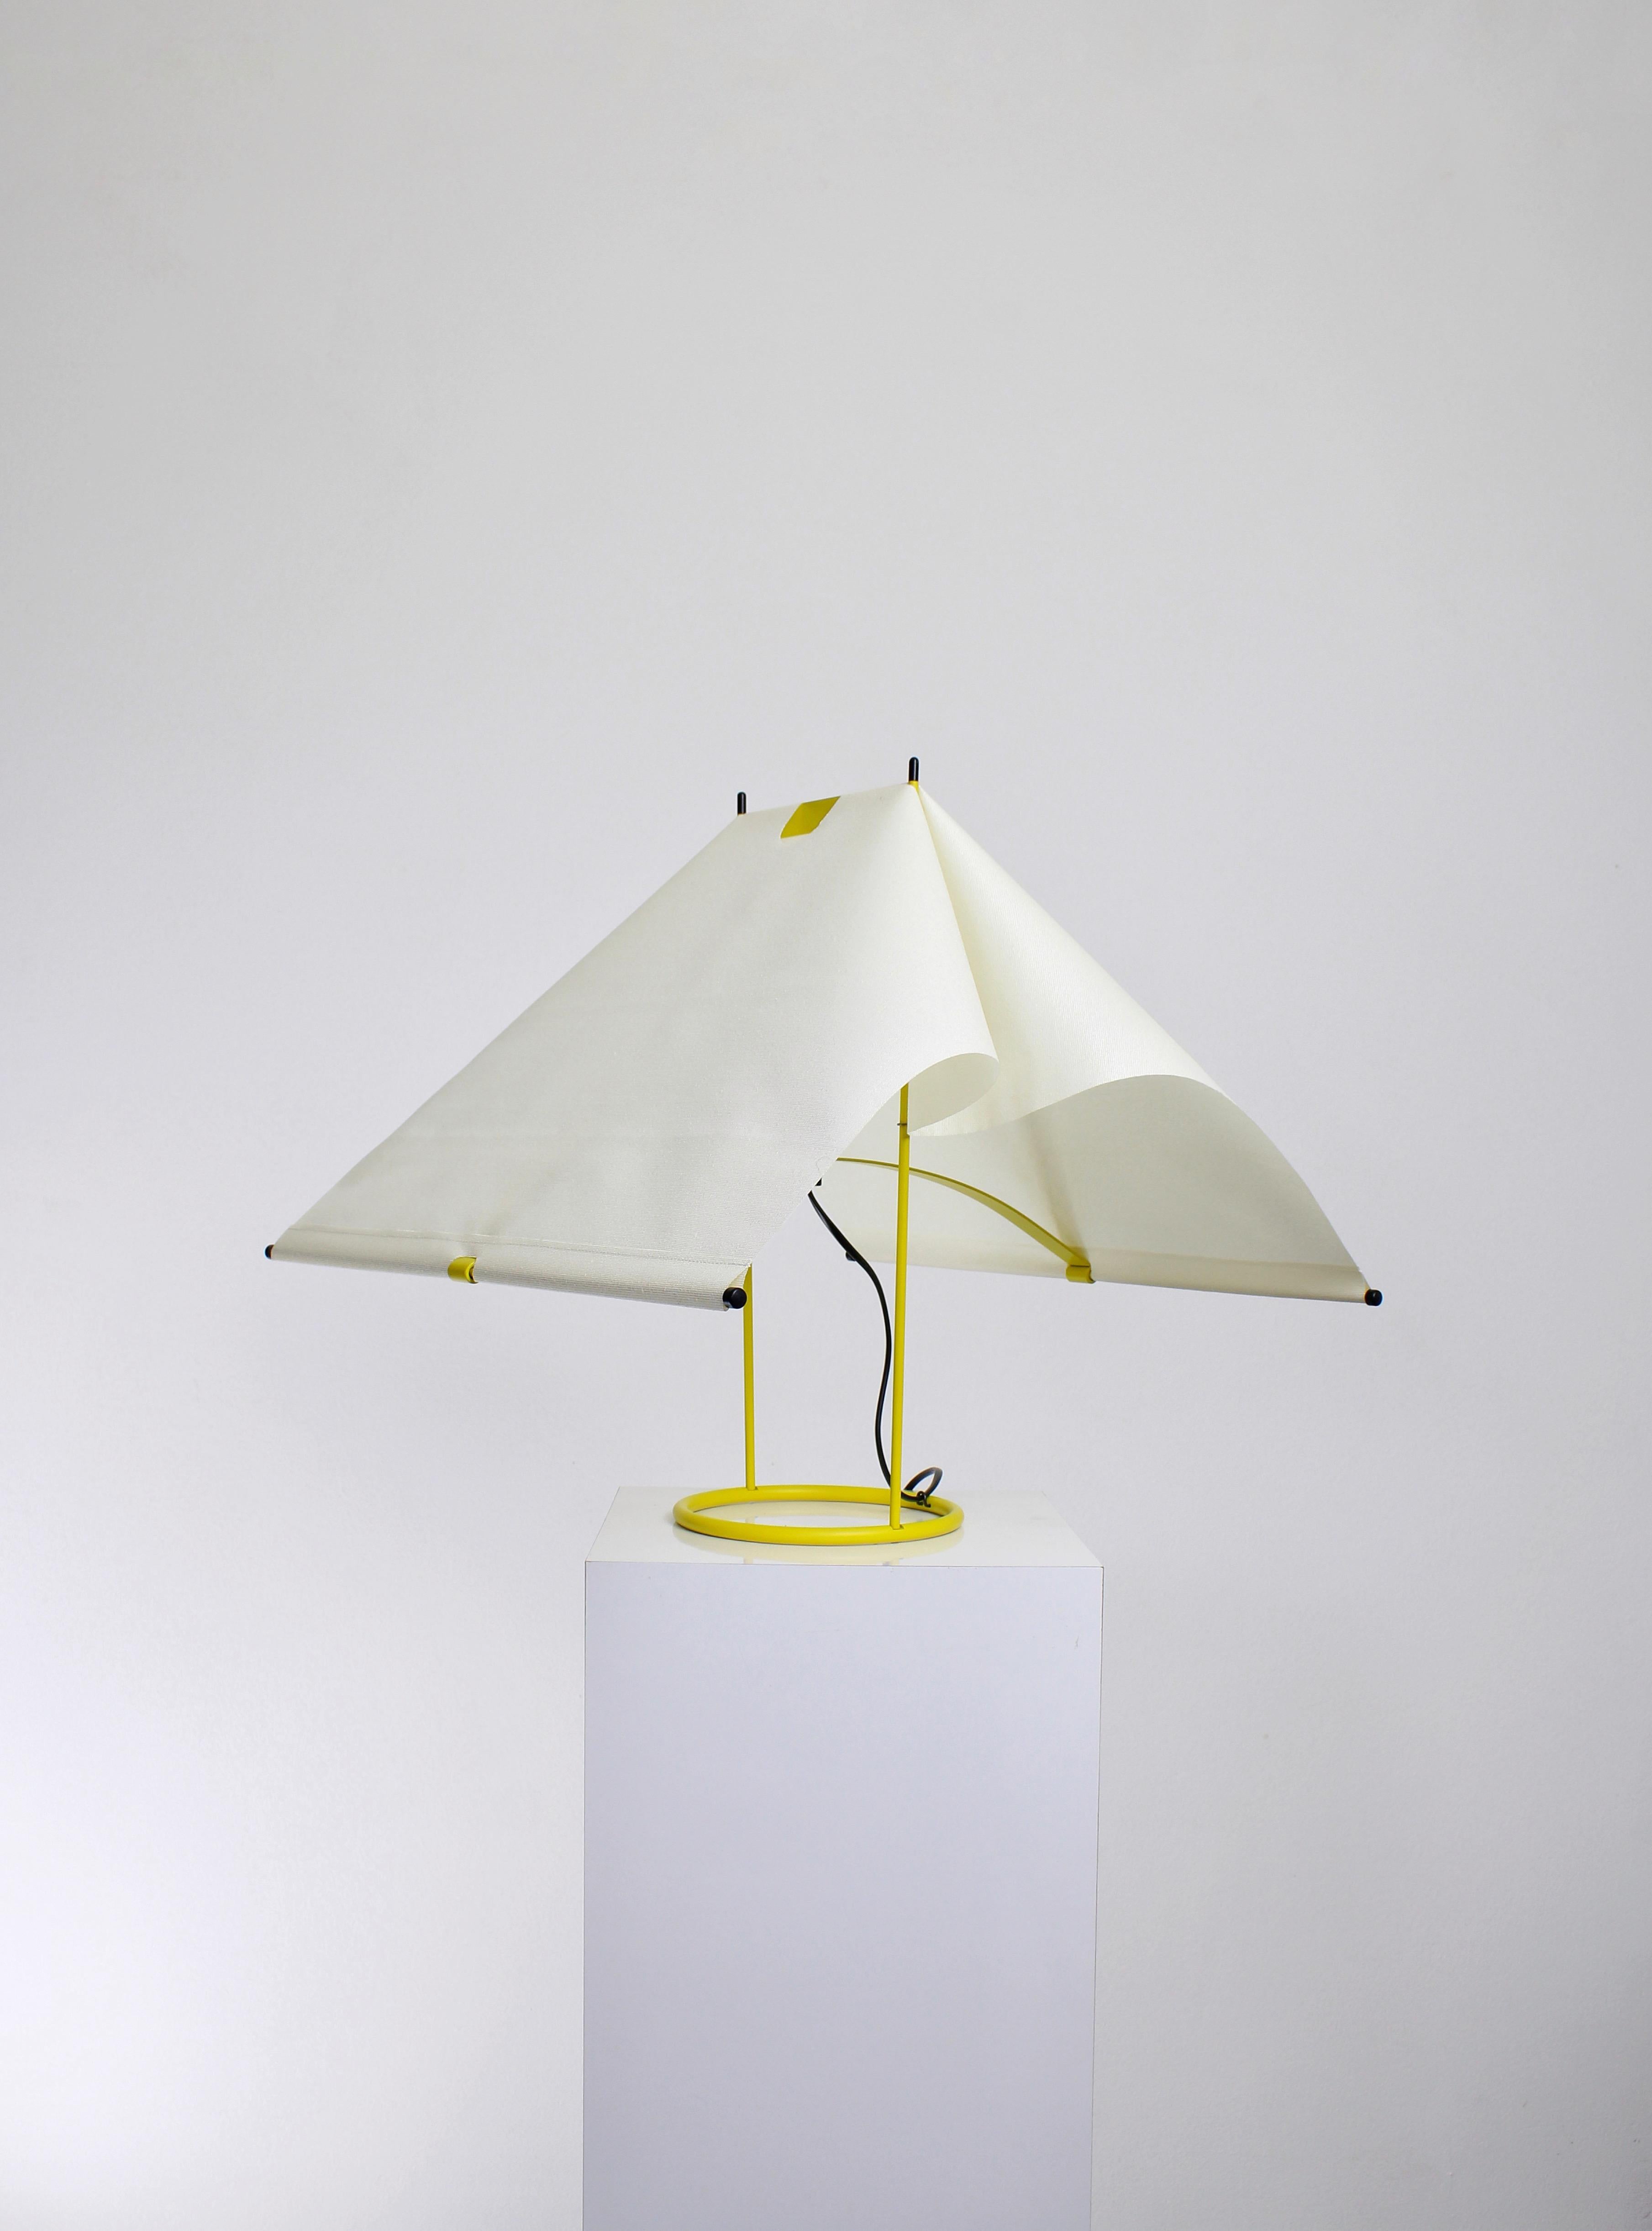 Yellow table lamp, model Falene. Produced by Arteluce circa 1980s. The designer Piero De Martini is an architect who spent most of his career working for Cassina. The Falene is made of yellow lacquered steel and a crème fabric shade, it looks like a